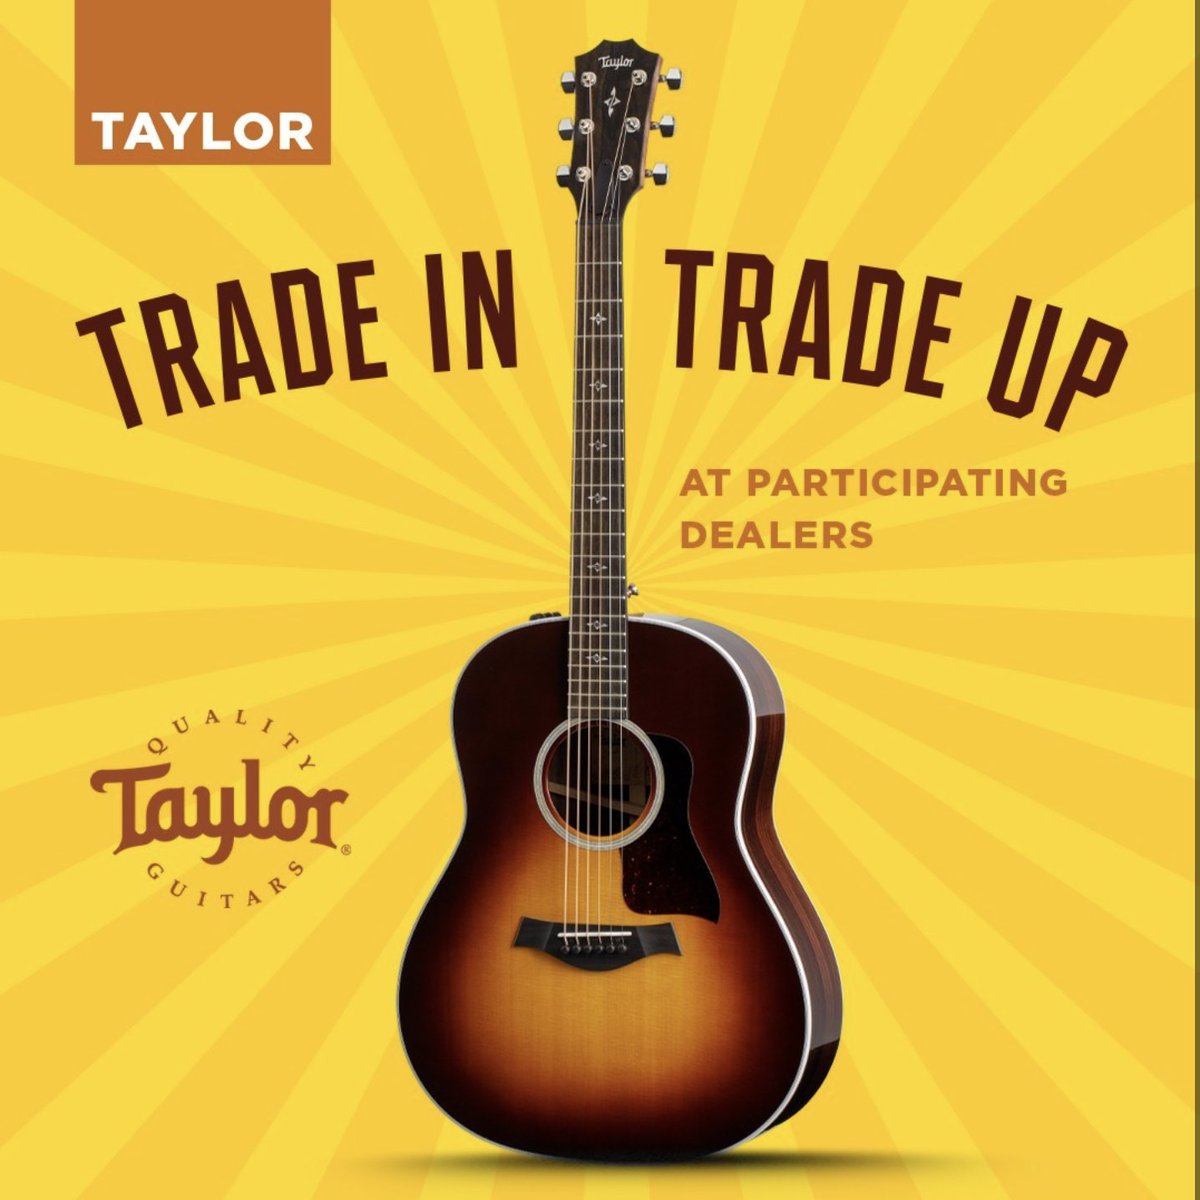 Hoping to clear out some space at home and add to your musical toolkit? With our Trade In, Trade Up event, you can get up to $200 in additional trade value when you trade in a guitar and purchase a new Taylor model from the American Dream Series and above. Deal ends October 31,…